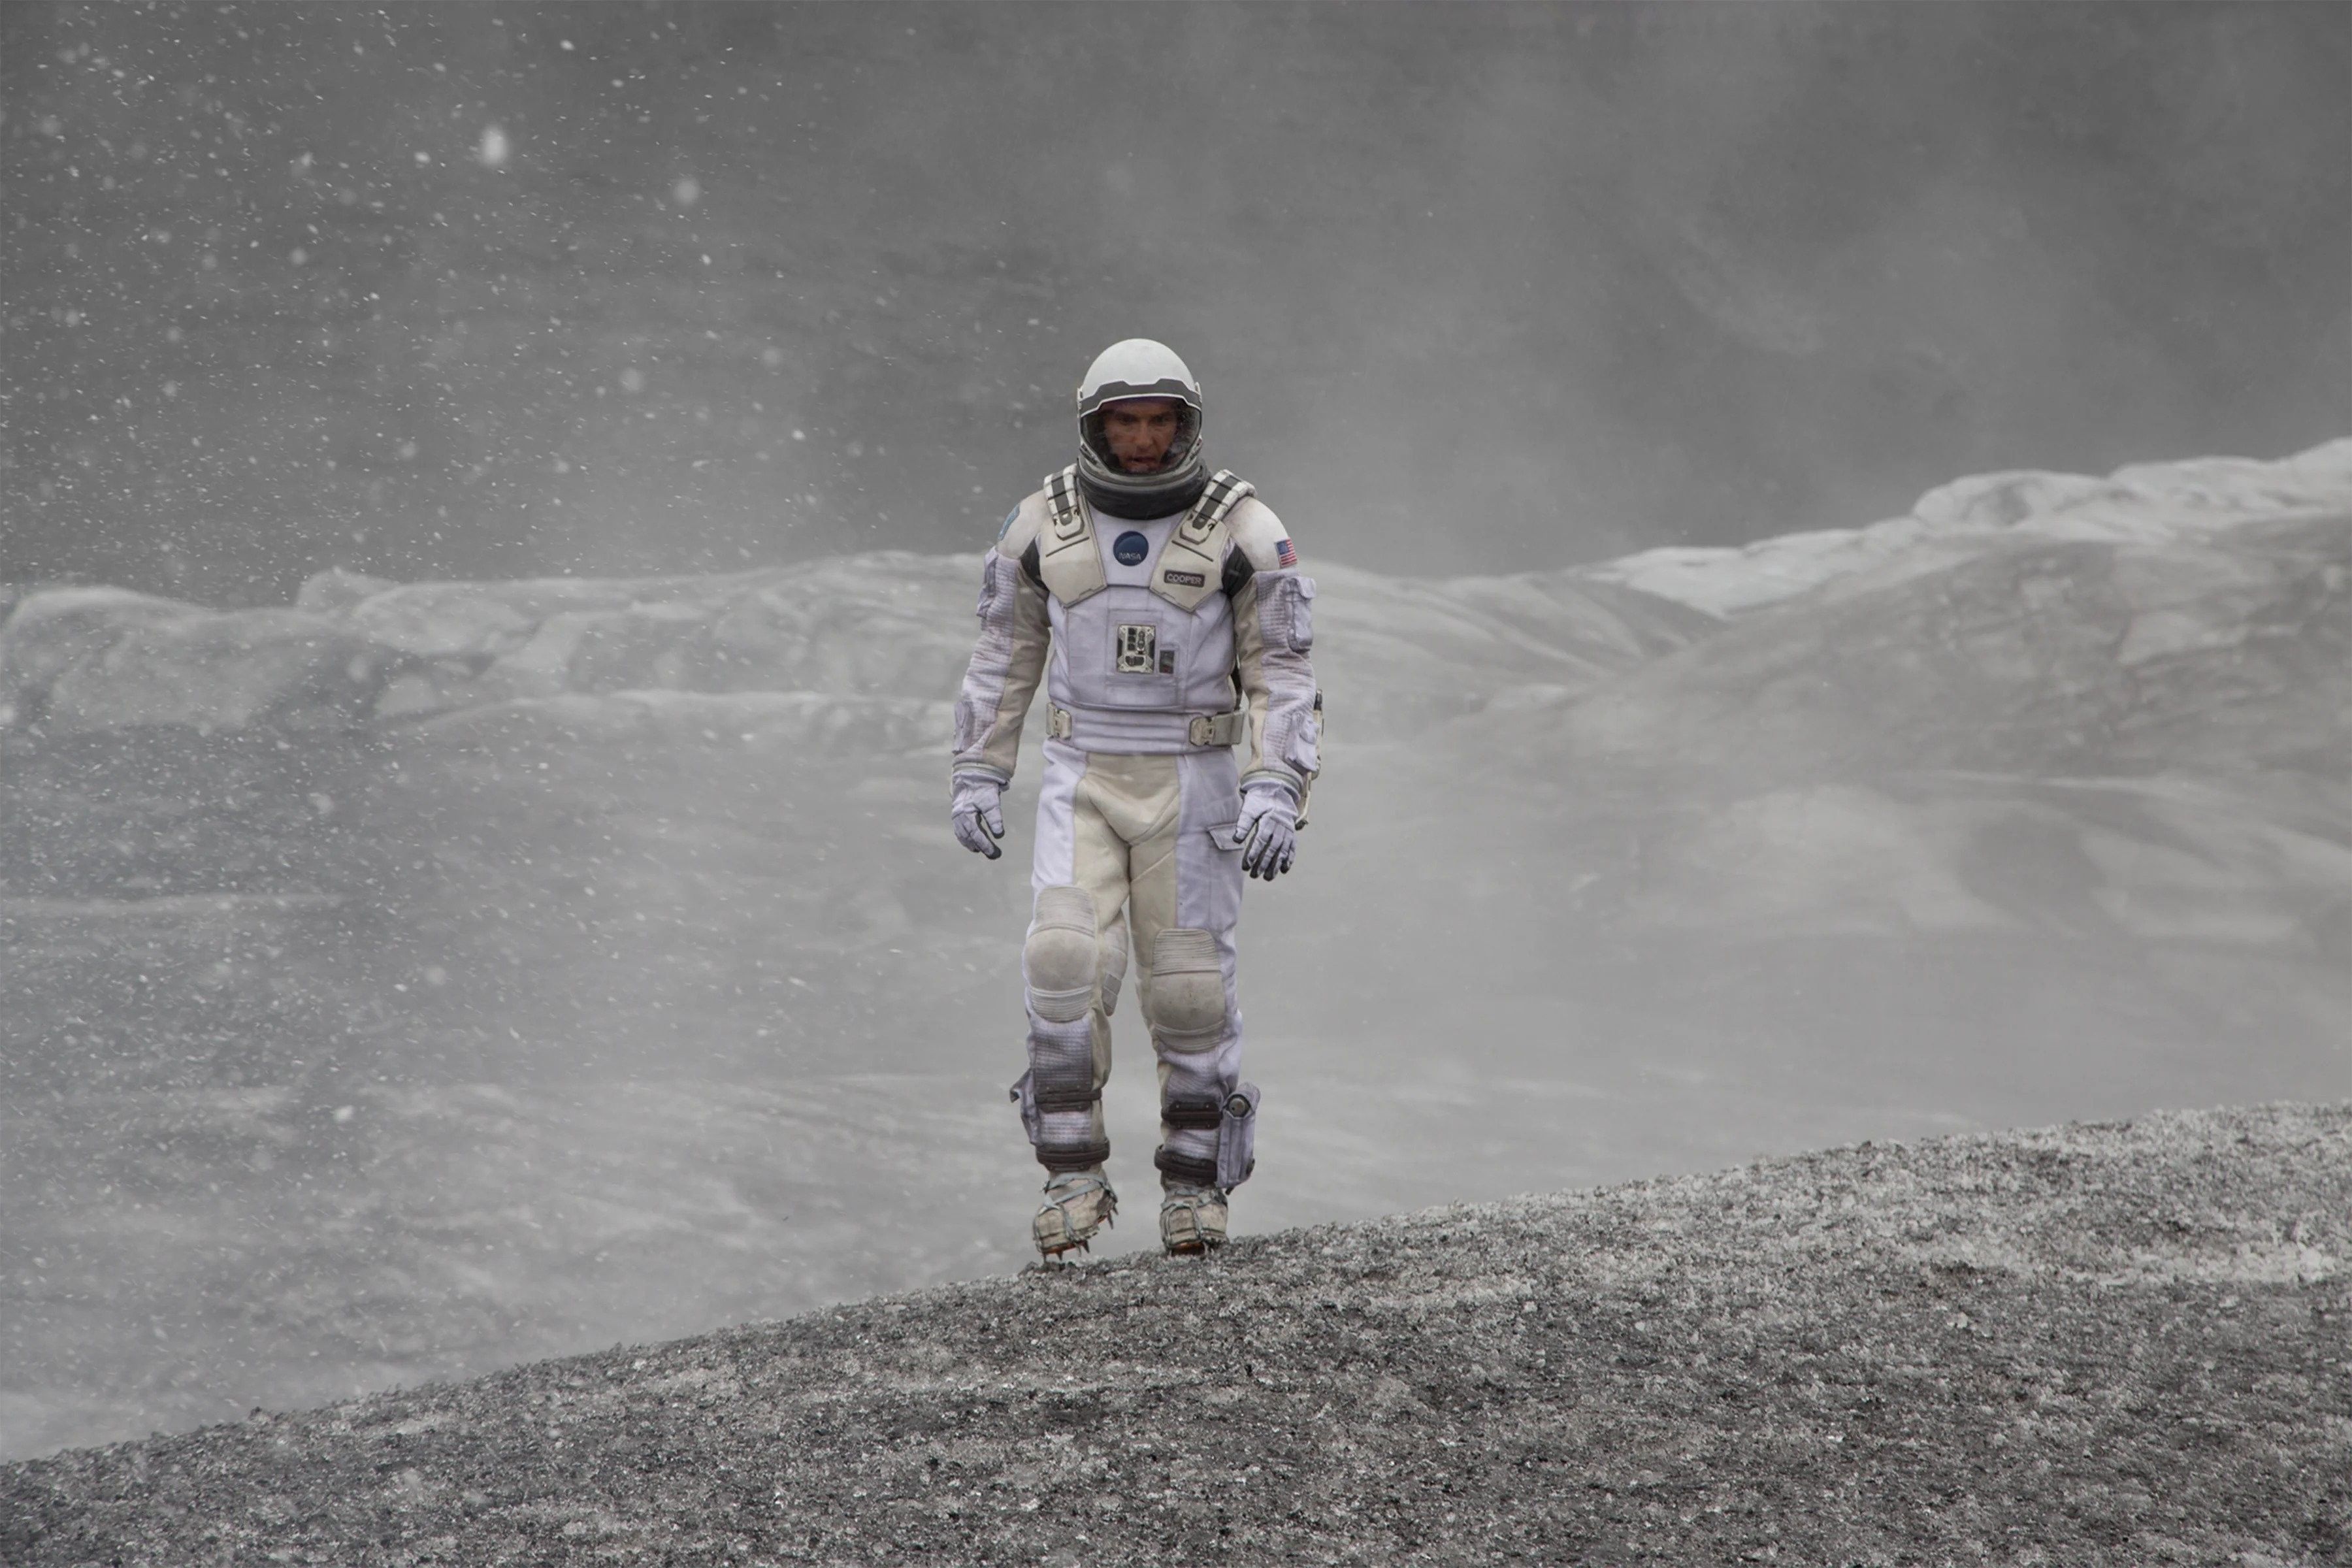 interstellar-explained-movie-plot-timeline-ending-themes-and-meaning